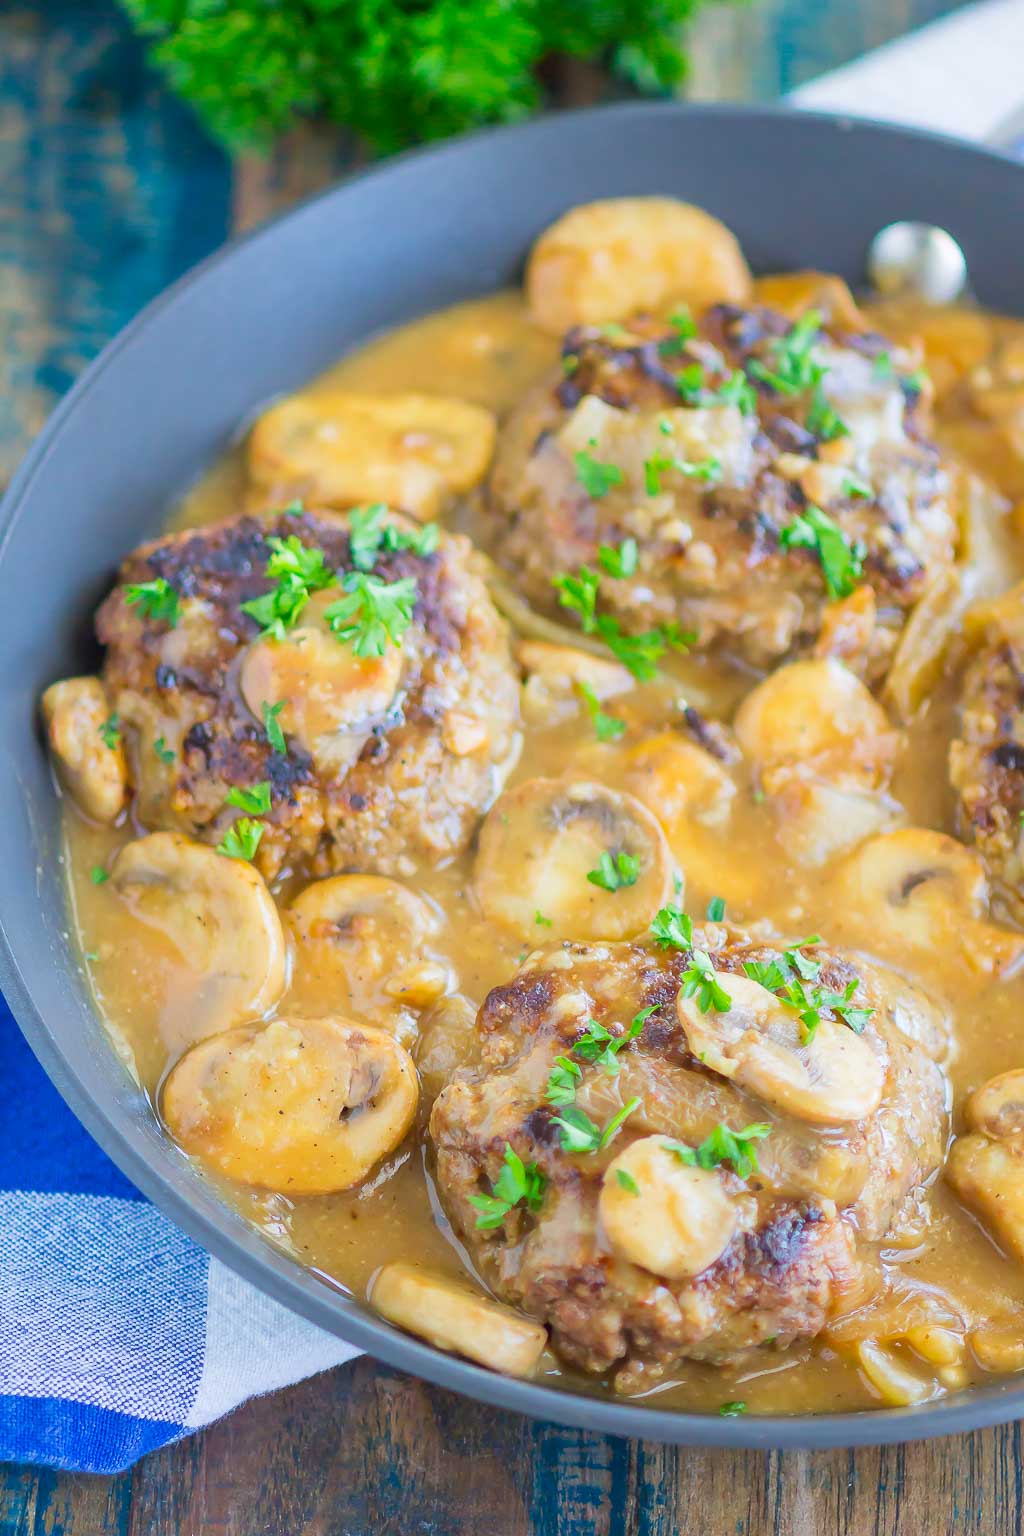 Easy Salisbury Steak with mushroom gravy is ready in just 30 minutes. It's the perfect comfort dish that your whole family will love!